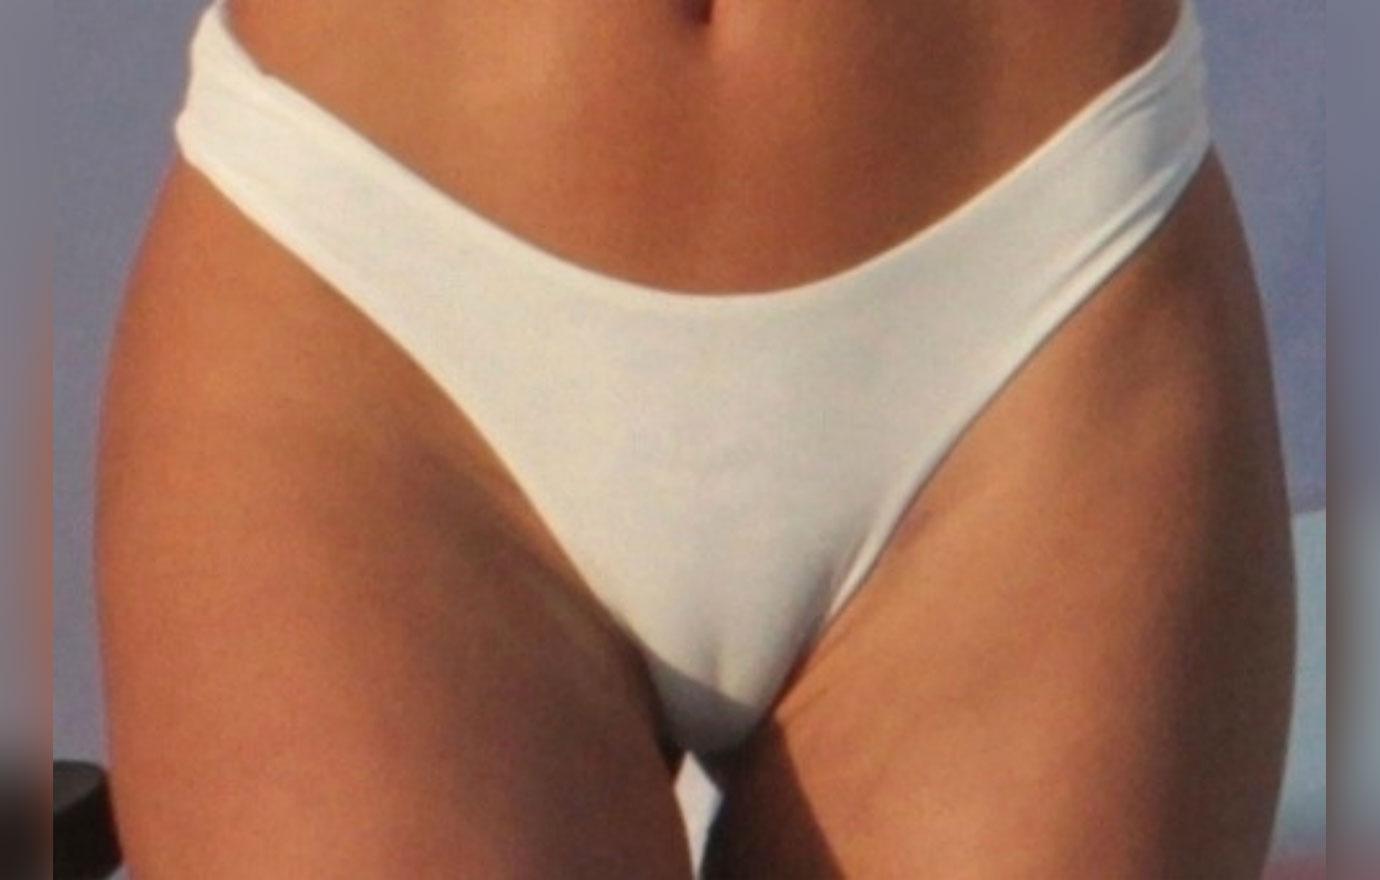 david llewellyn jones recommends the best of cameltoe pic